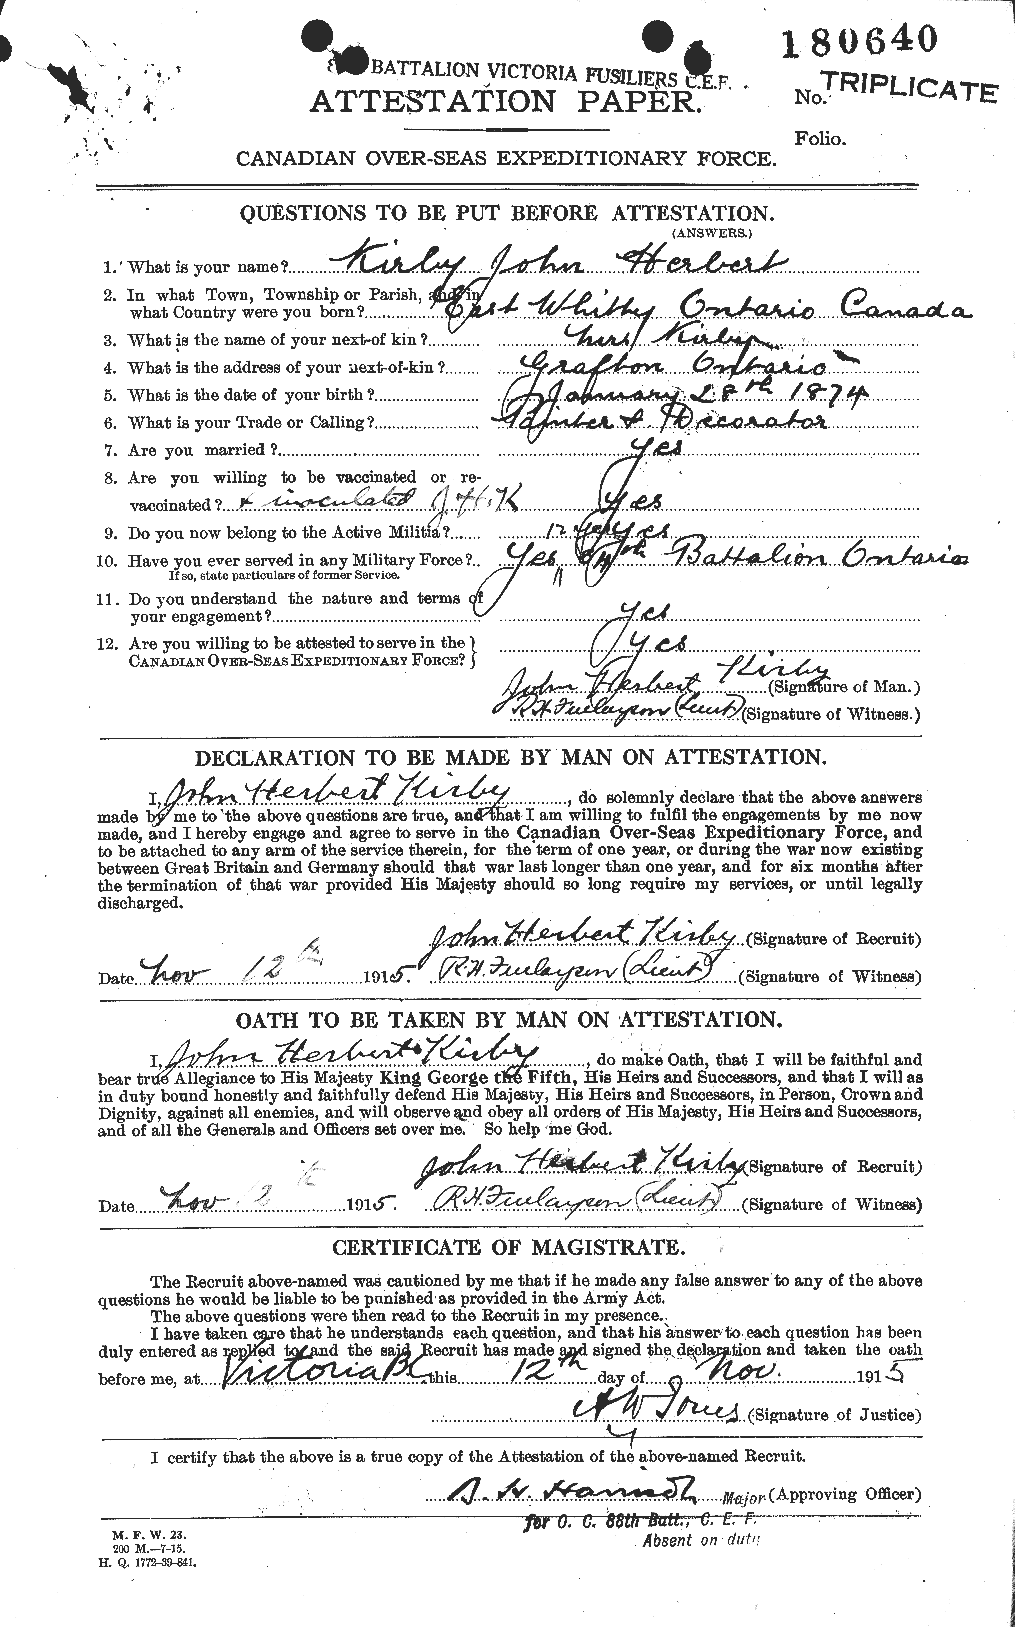 Personnel Records of the First World War - CEF 437232a